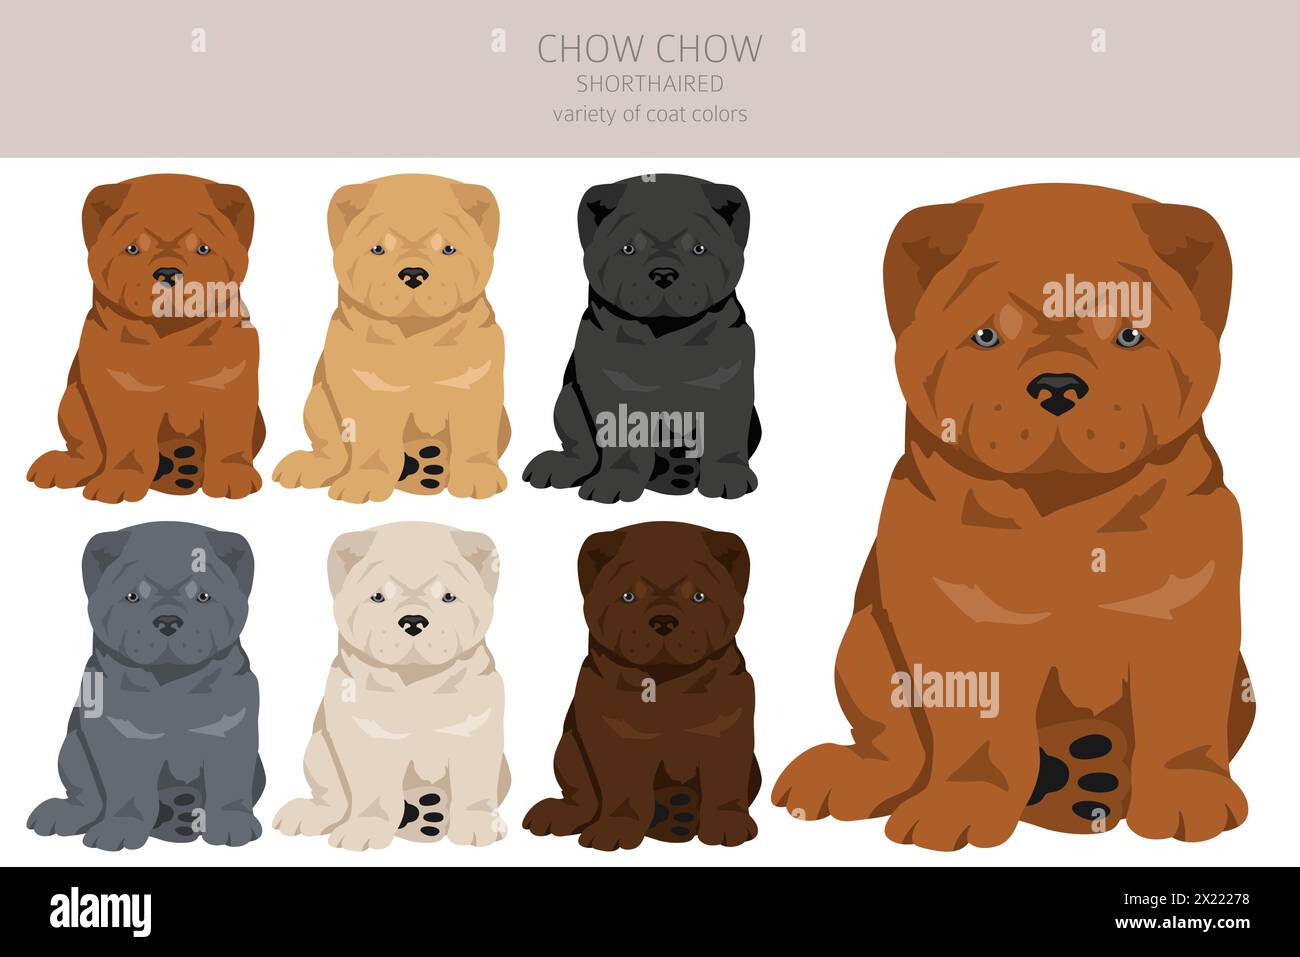 Chow chow shorthaired variety puppy clipart. Different poses, coat colors set.  Vector illustration Stock Vector